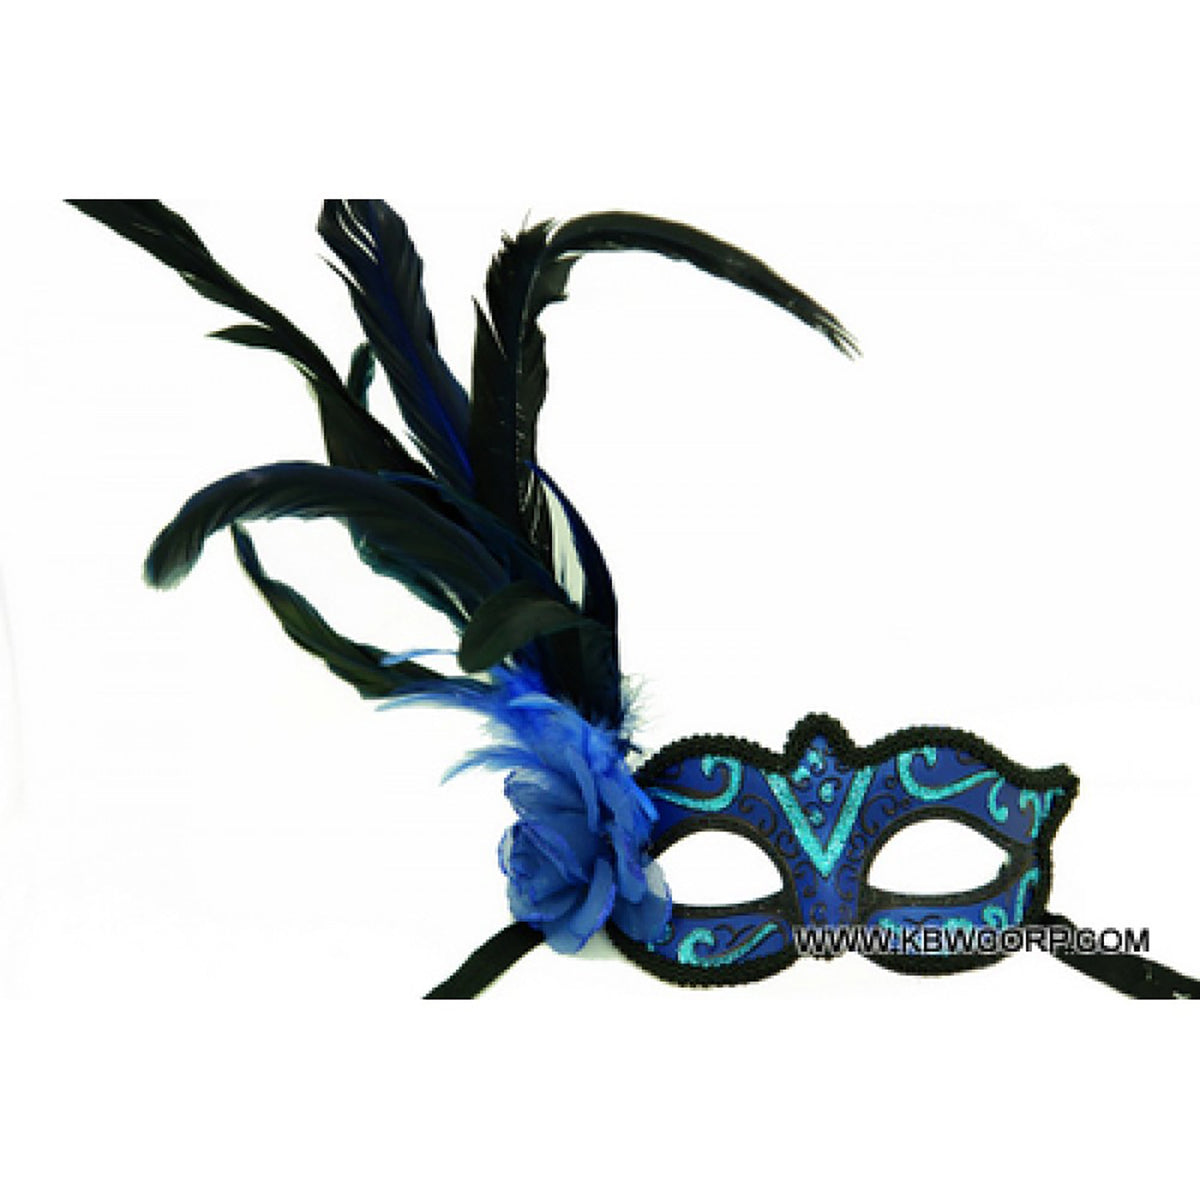 KBW GLOBAL CORP Costume Accessories Black and Blue Venetian Mask with Feather, 1 Count